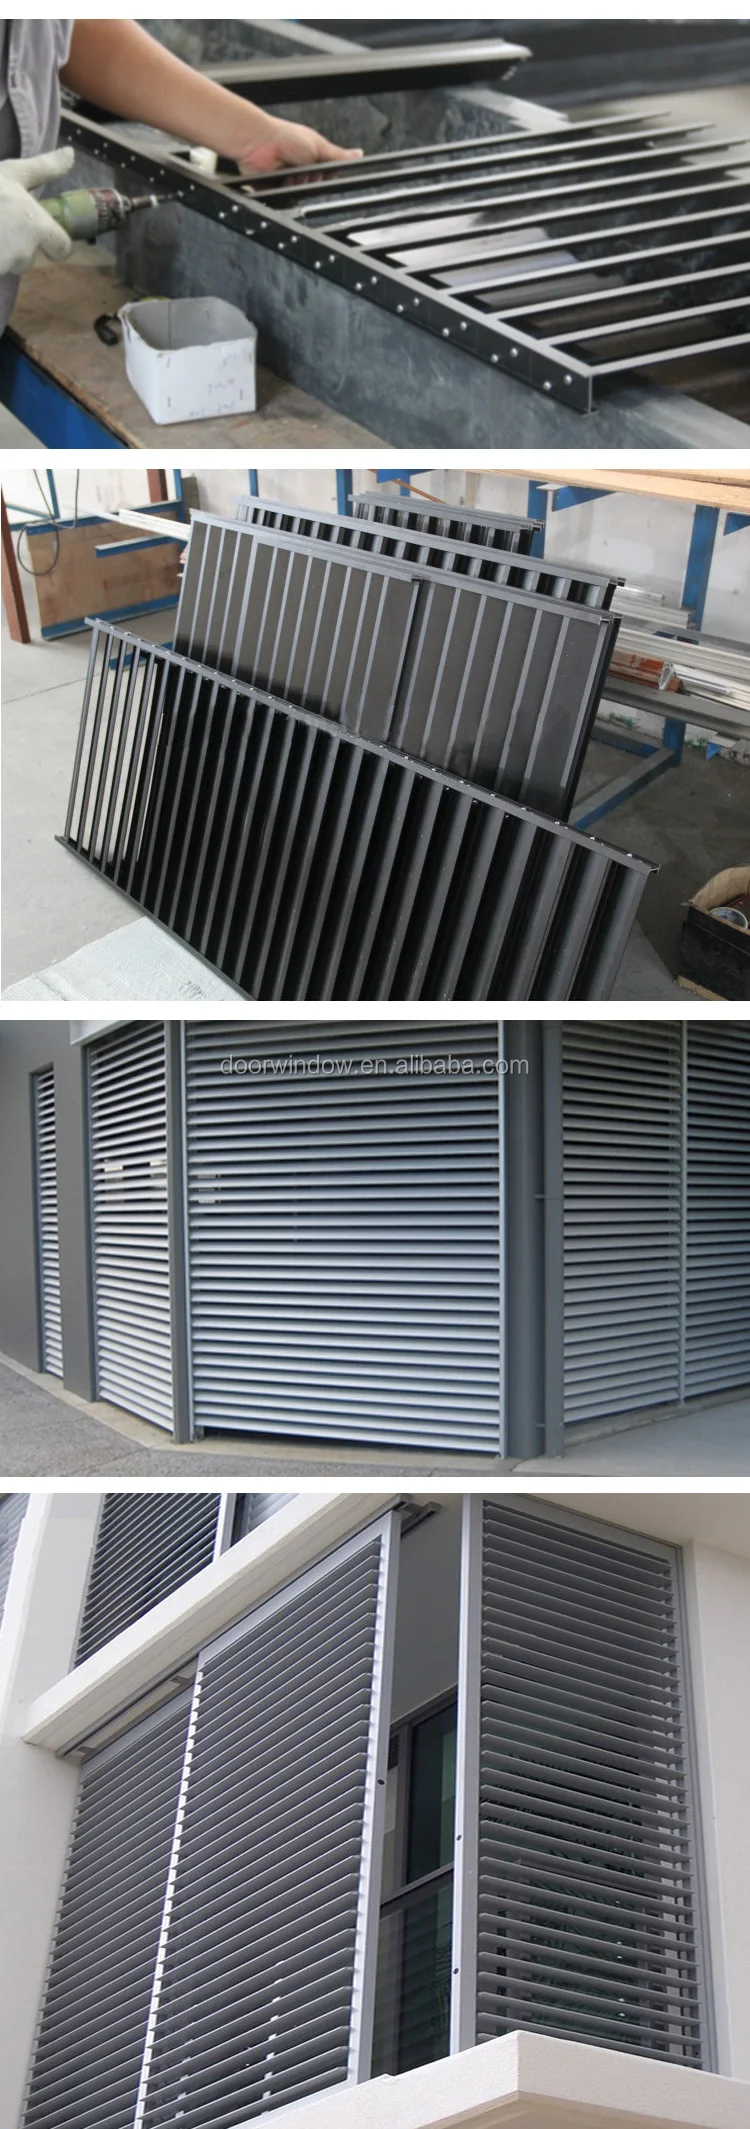 Good quality and price of louver windows diy interior window shutters lowes inside